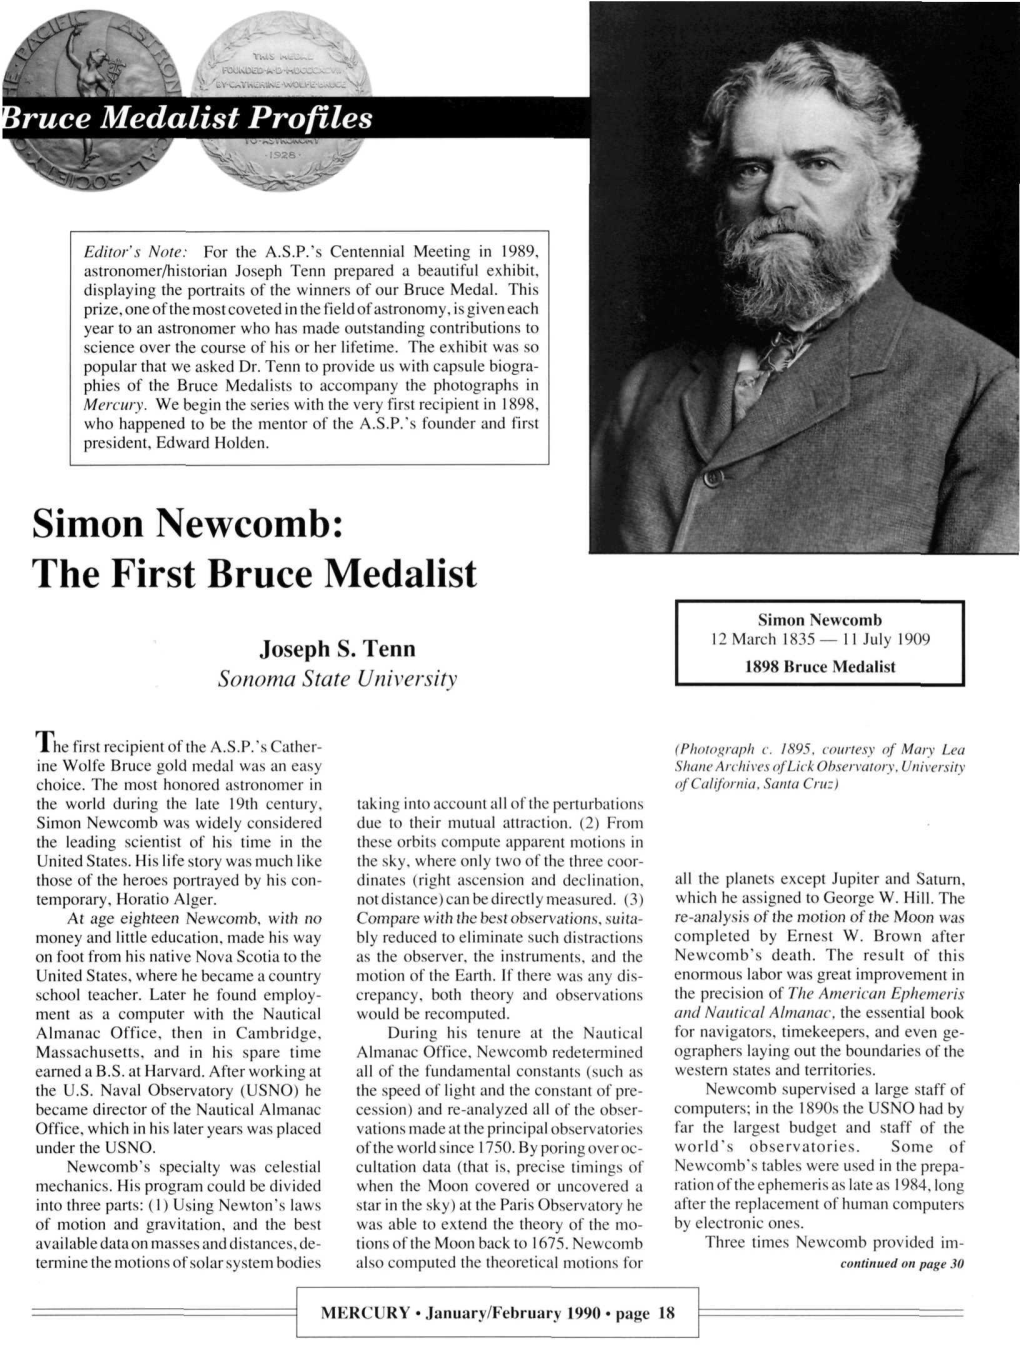 Simon Newcomb: the First Bruce Medalist